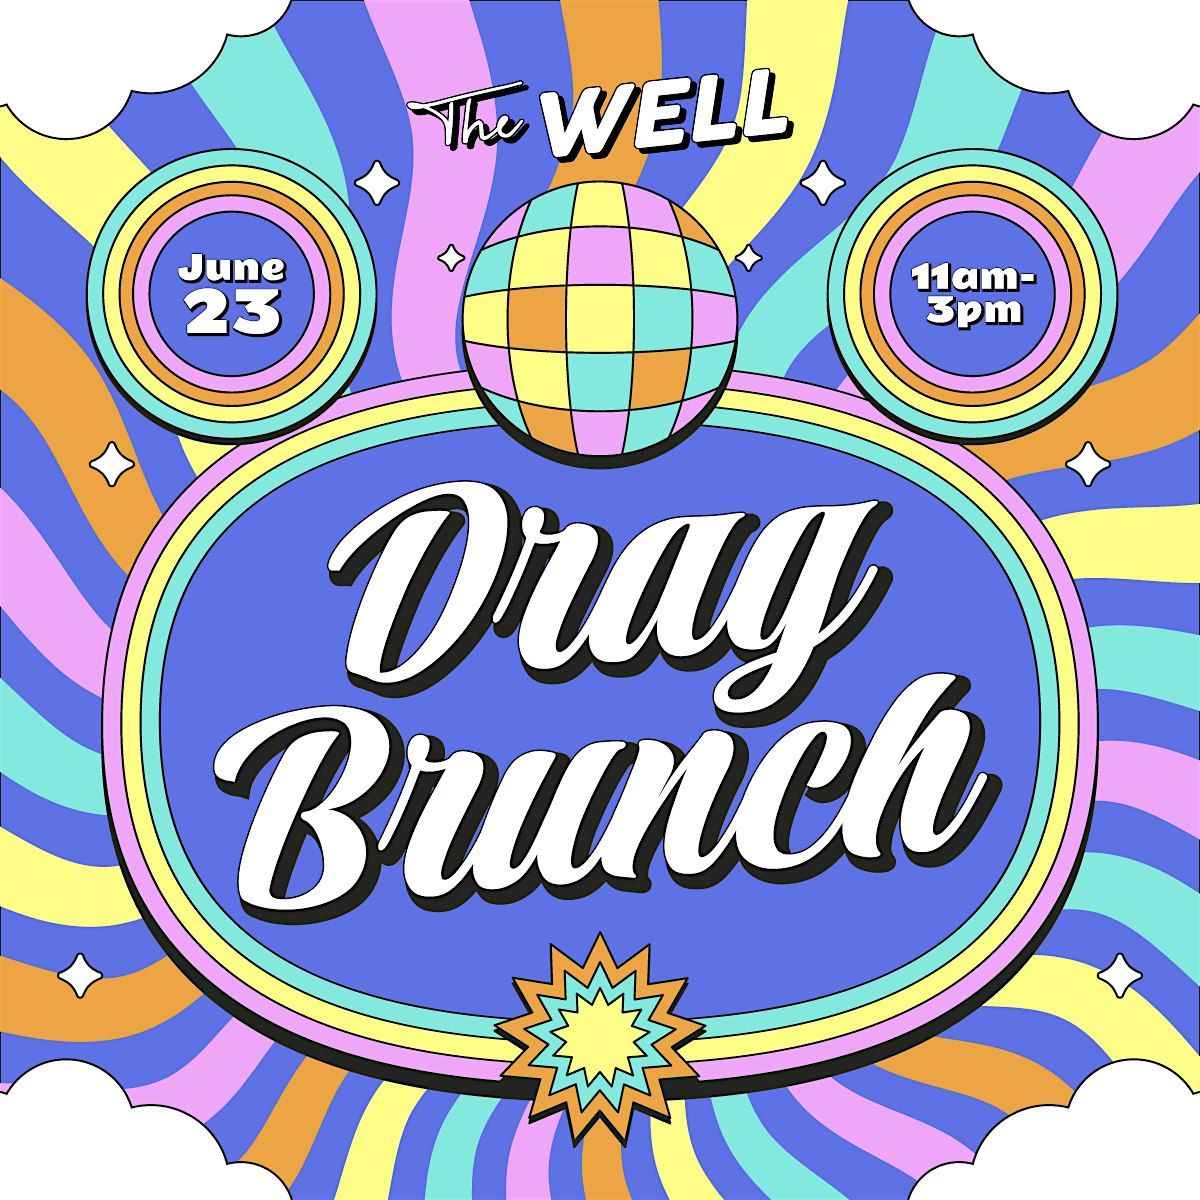 Pride Brunch at The Well